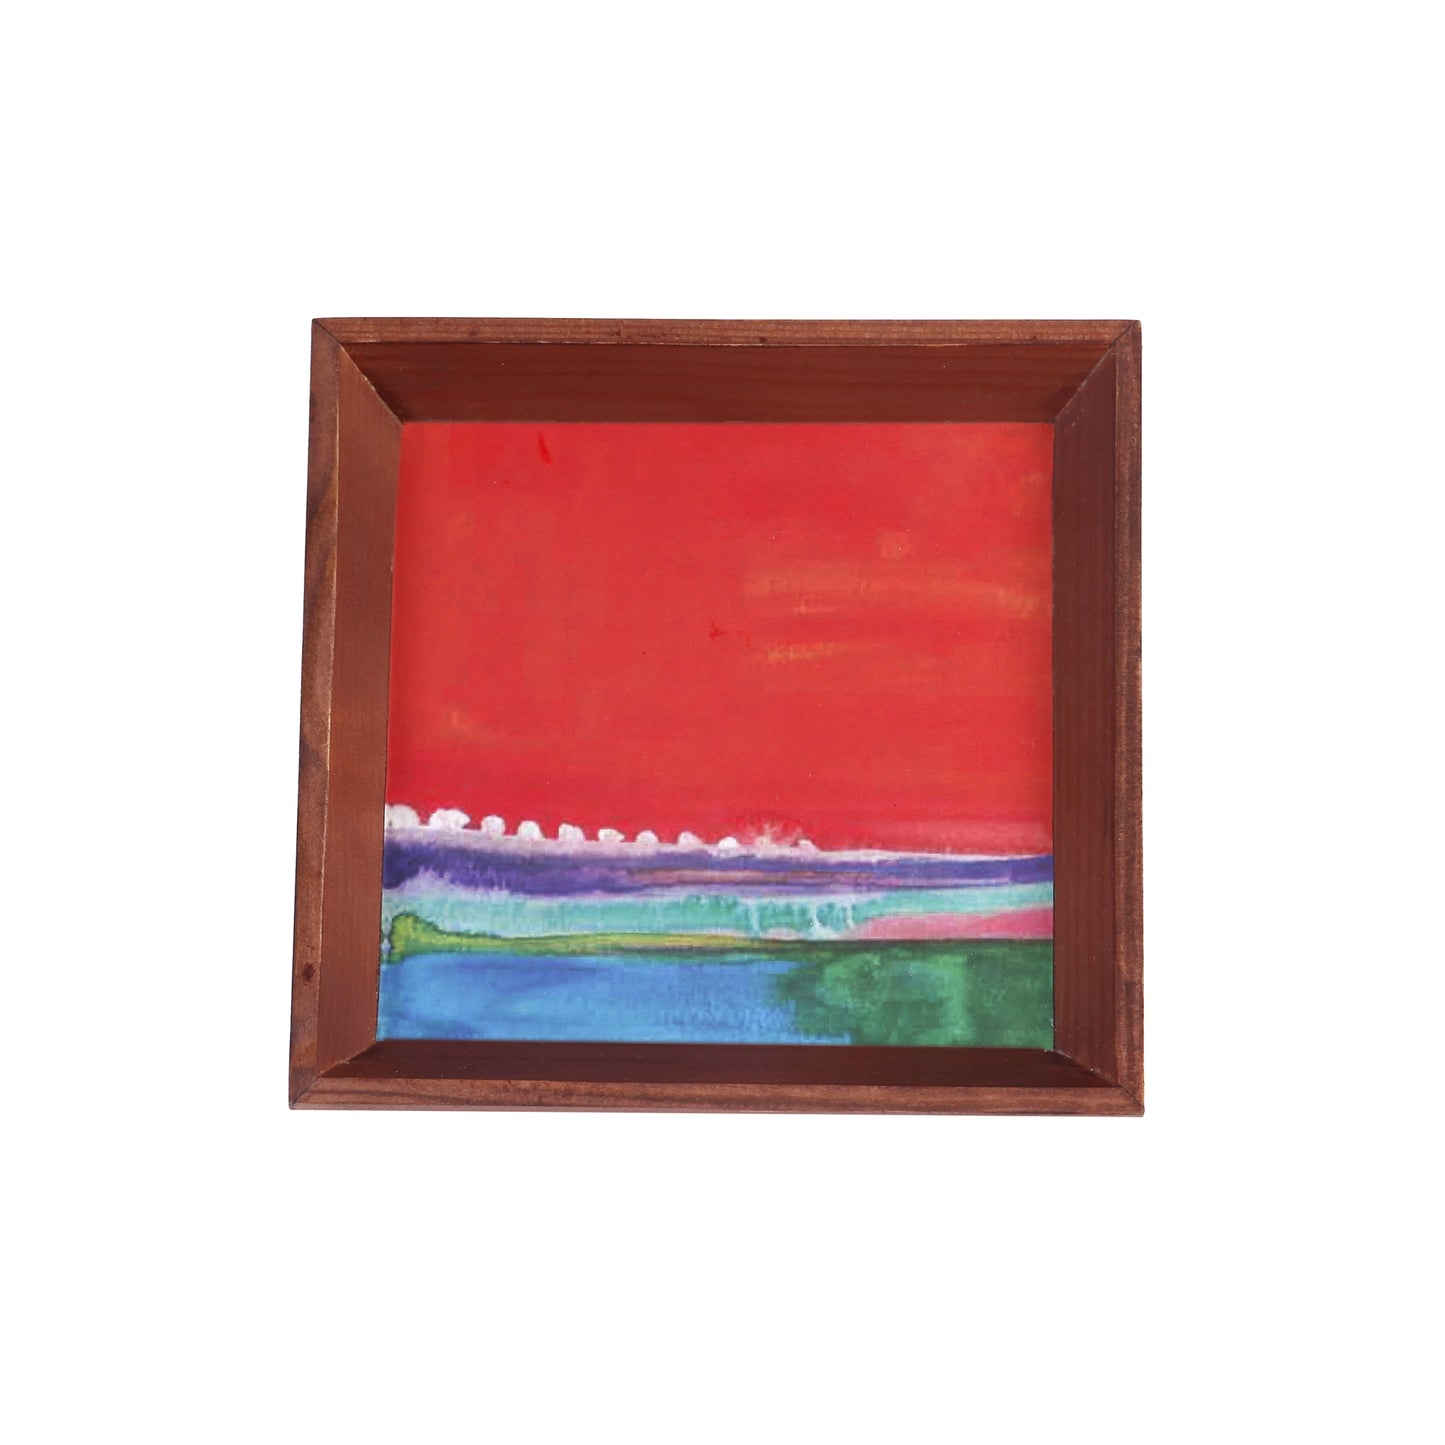 A Tiny Mistake Horizon Small Square Wooden Serving Tray, 18 x 18 x 2 cm